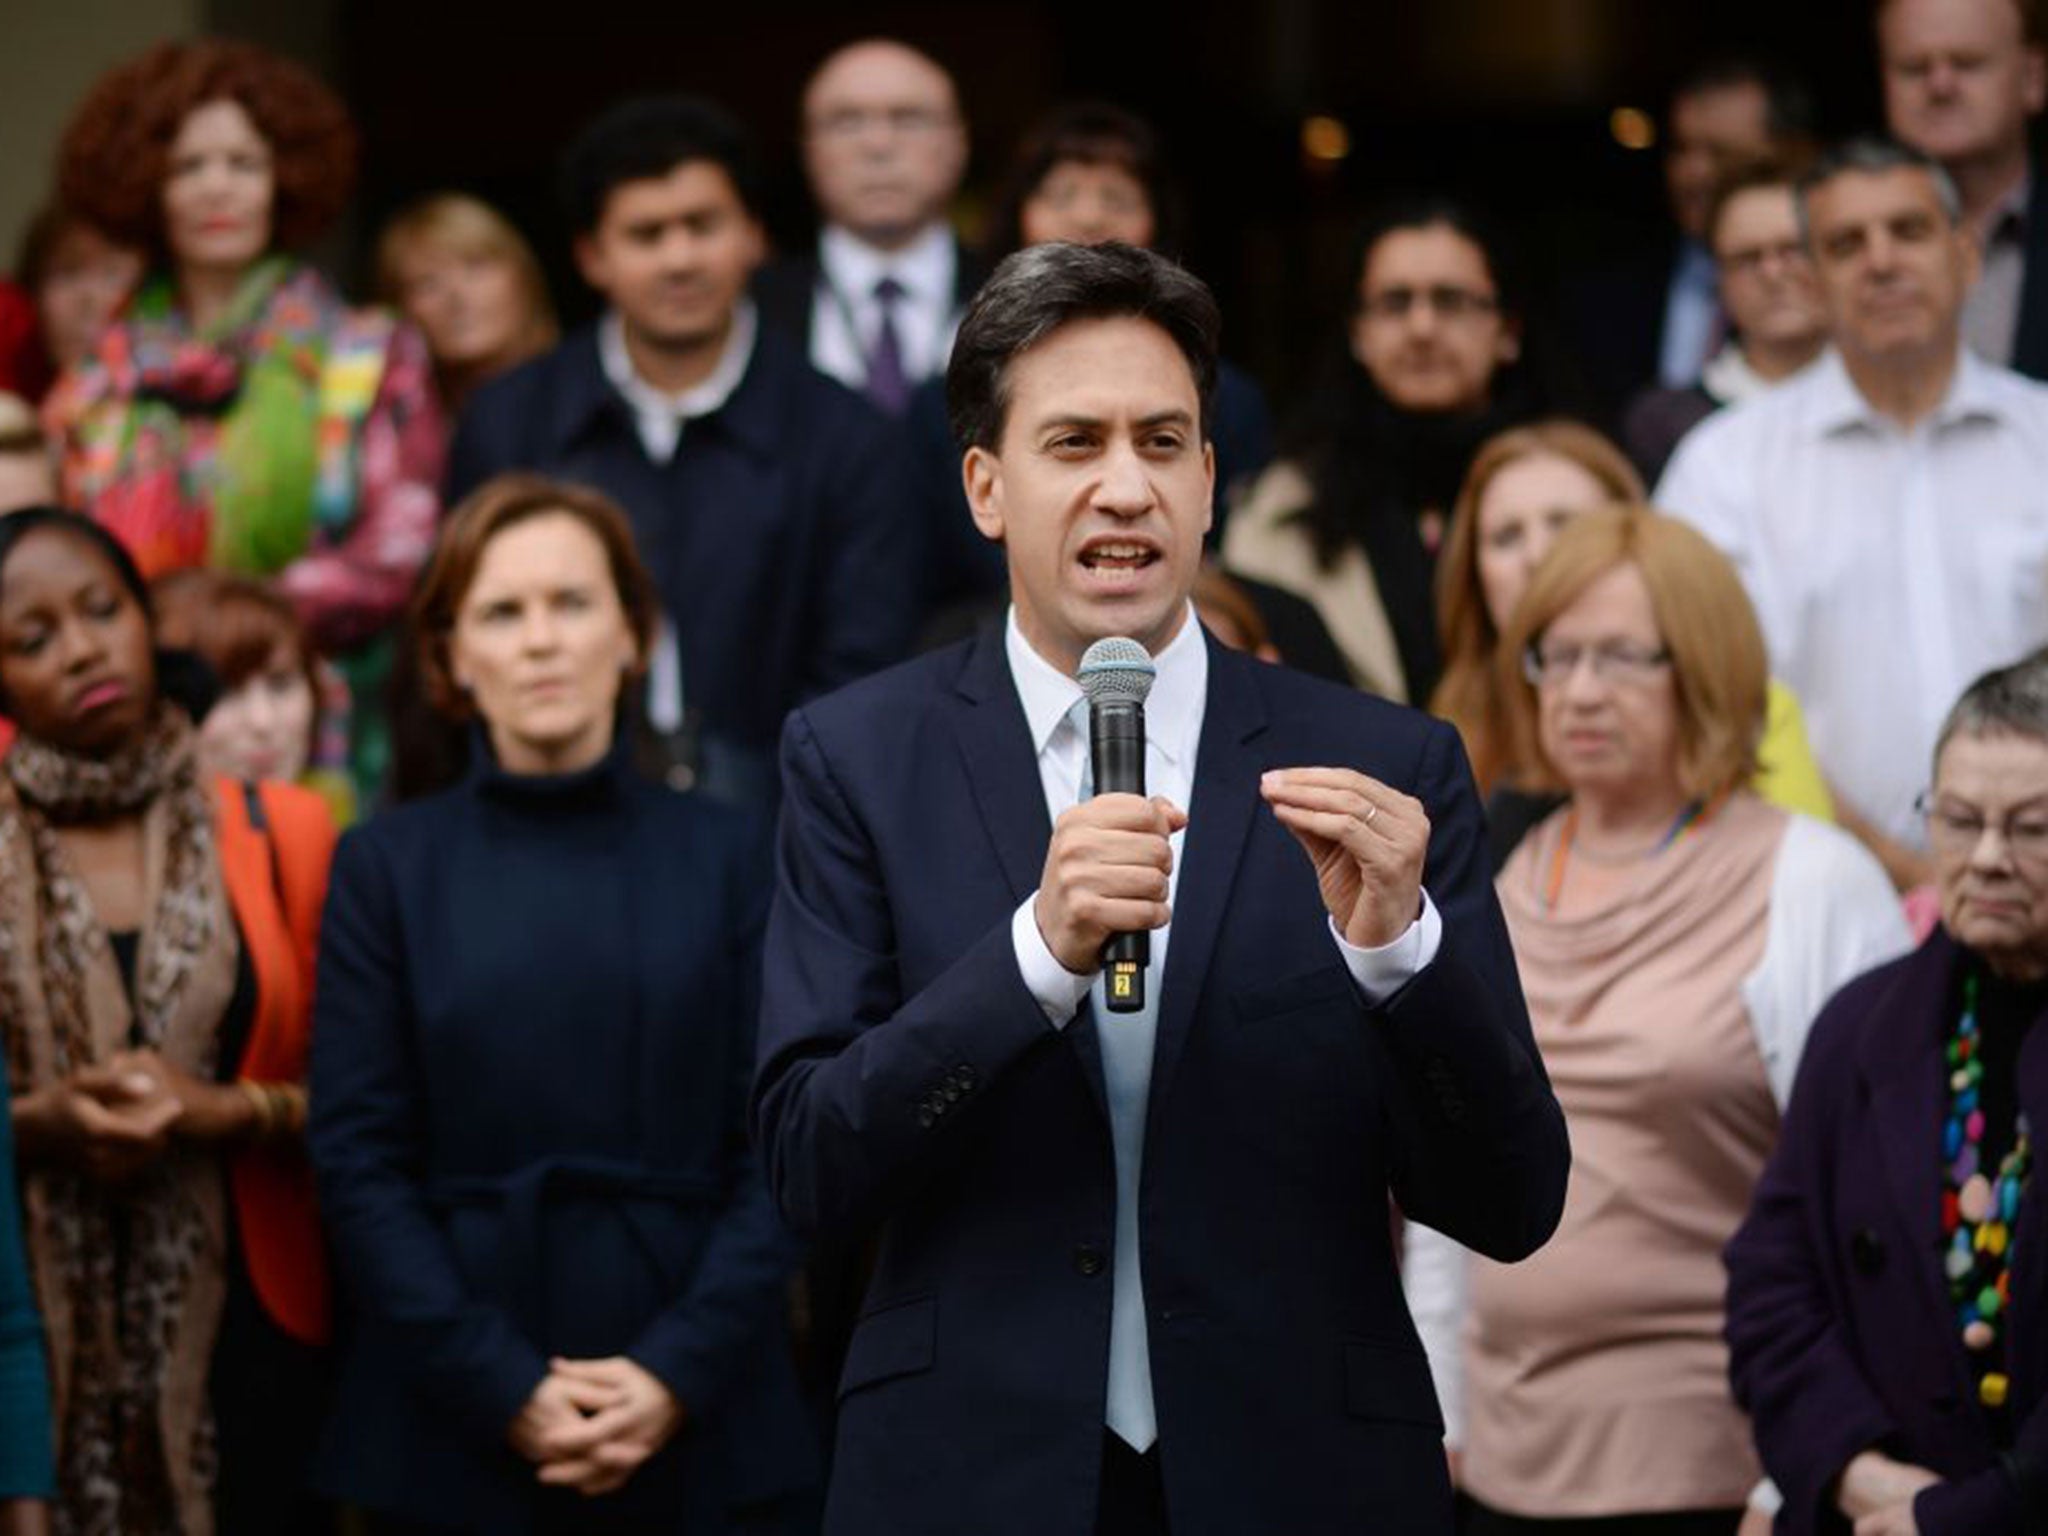 Ed Miliband at the Labour conference in Manchester on Saturday